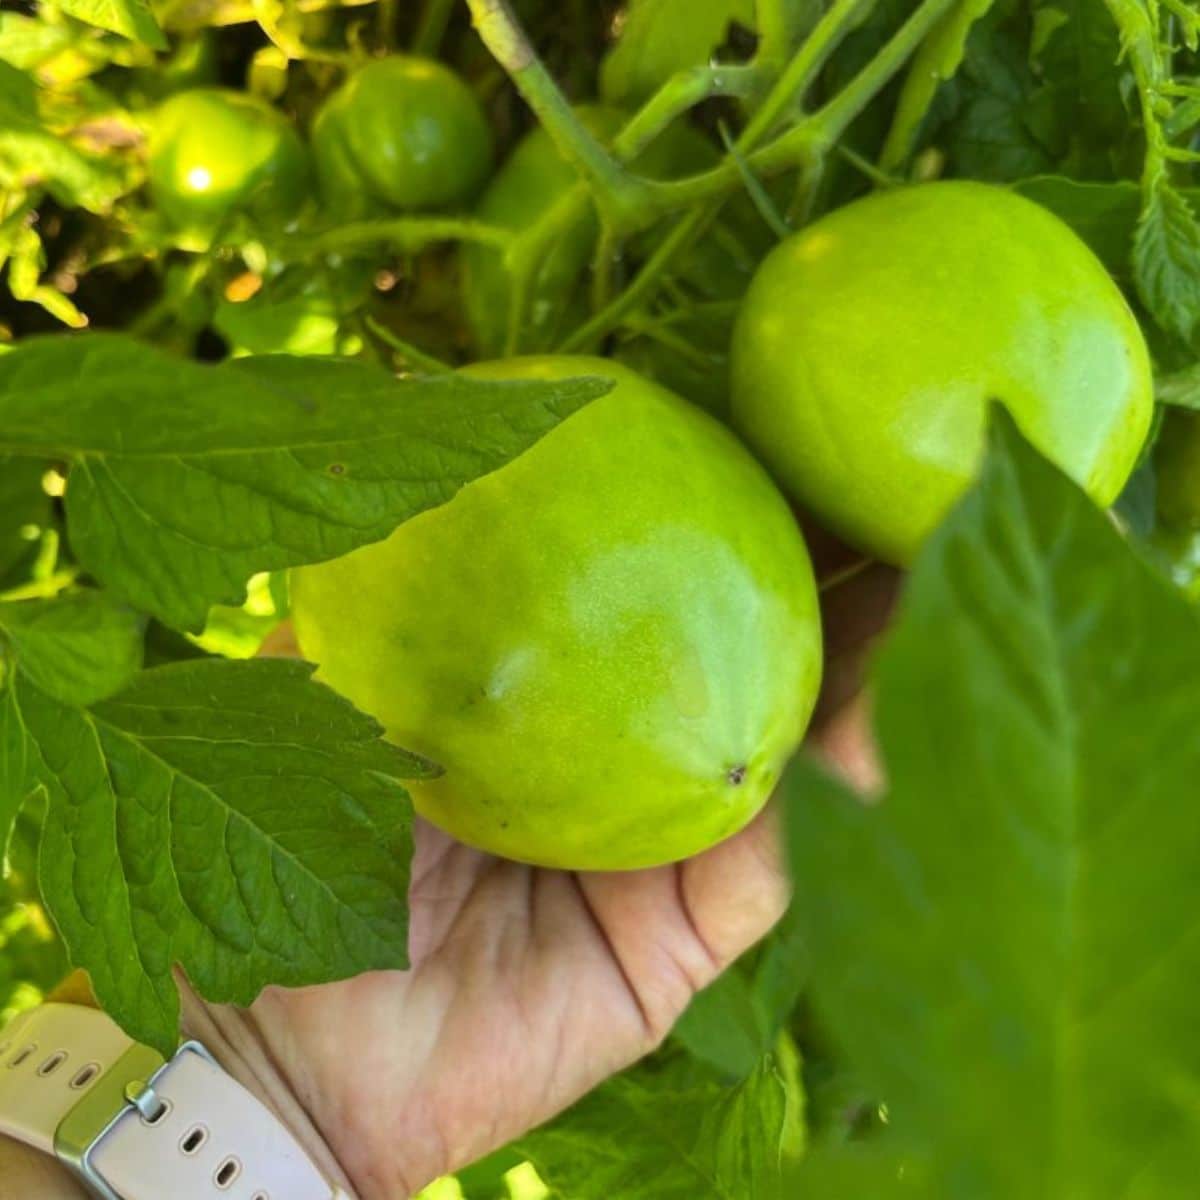 A gardener checking green tomatoes on the vine.